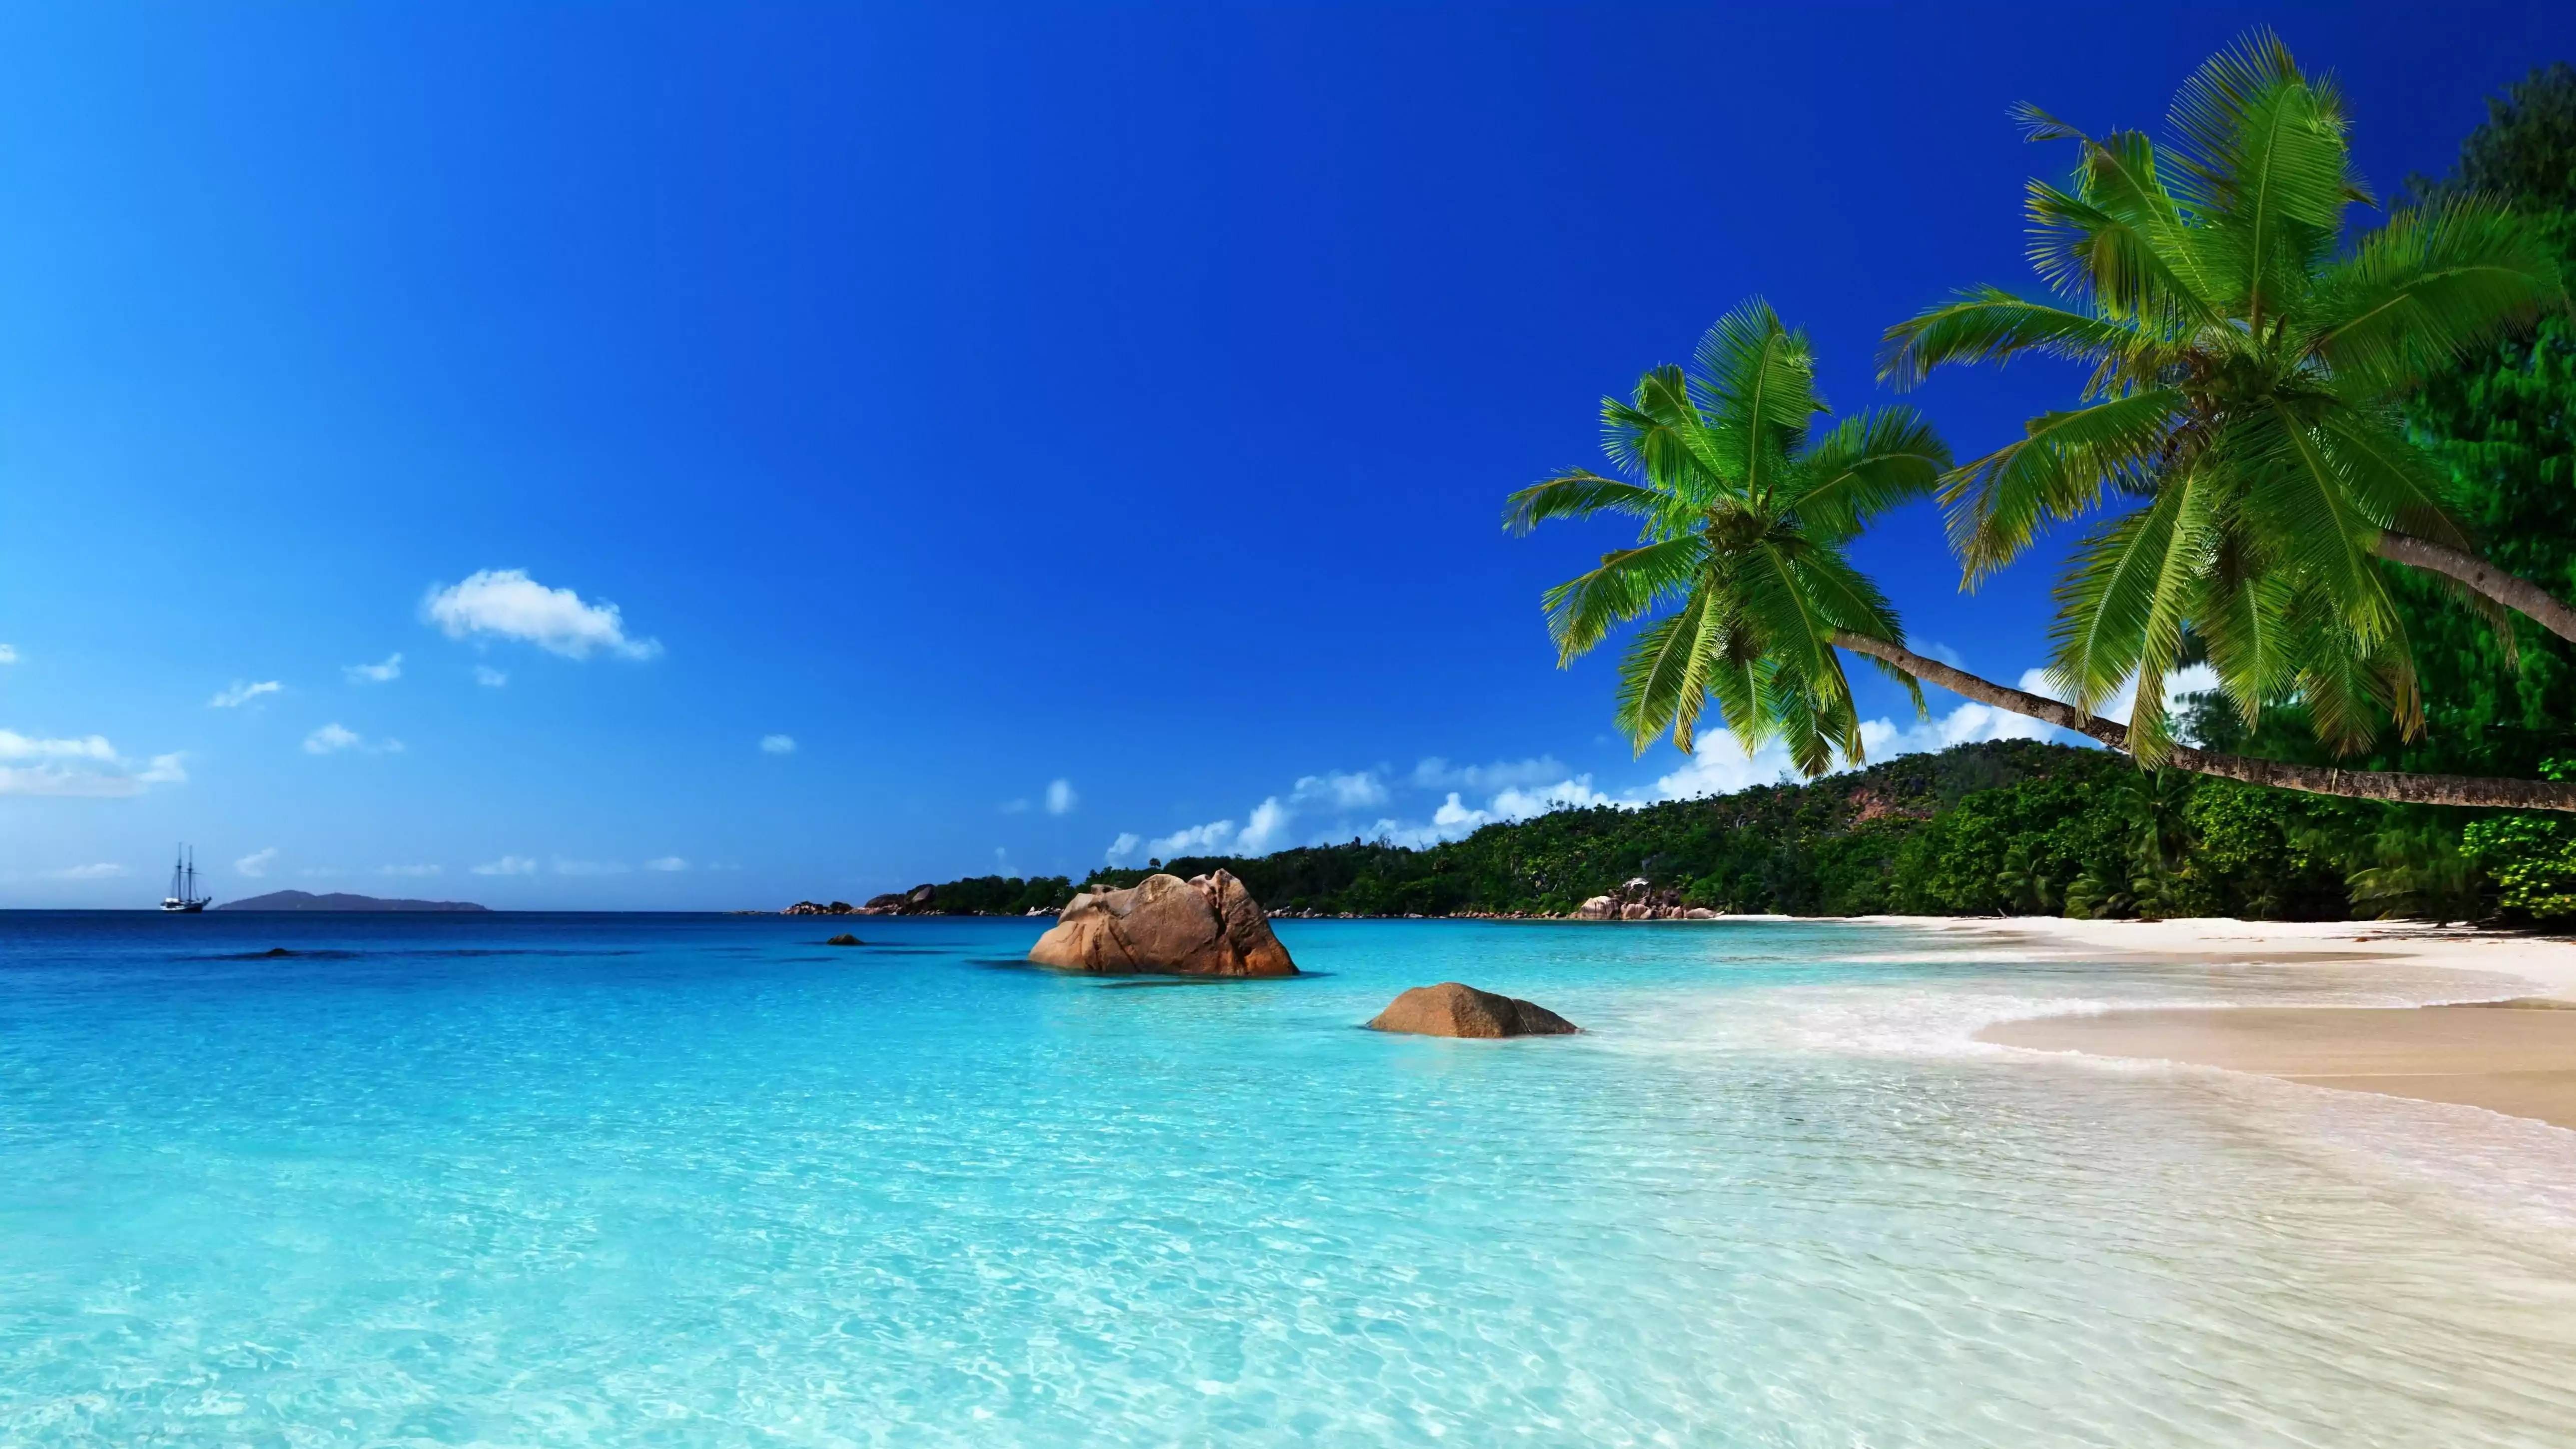 30 Beach Backgrounds  Free JPEG PNG Format Download